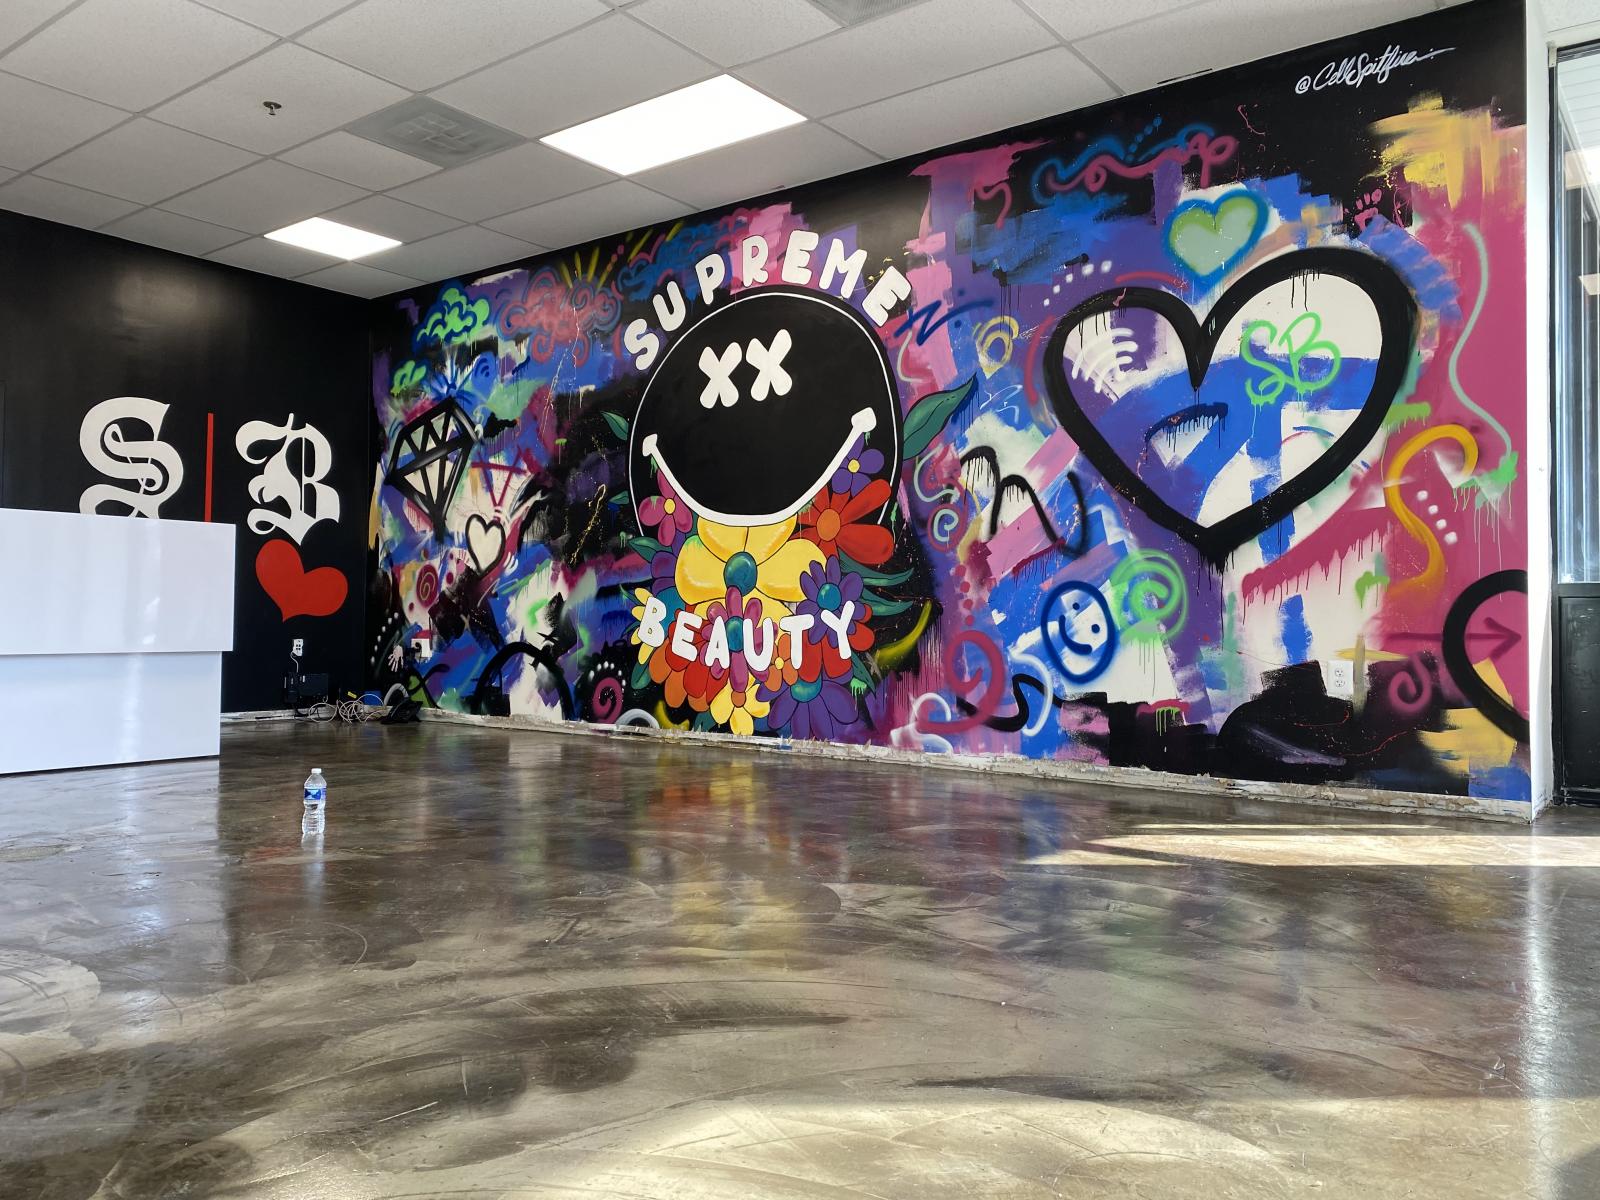 This is a indoor wall painted for Supreme Beauty which is a lash and makeup studio combined with an interactive art gallery. The mural serves as the opening visual to visitors entering the establishment.